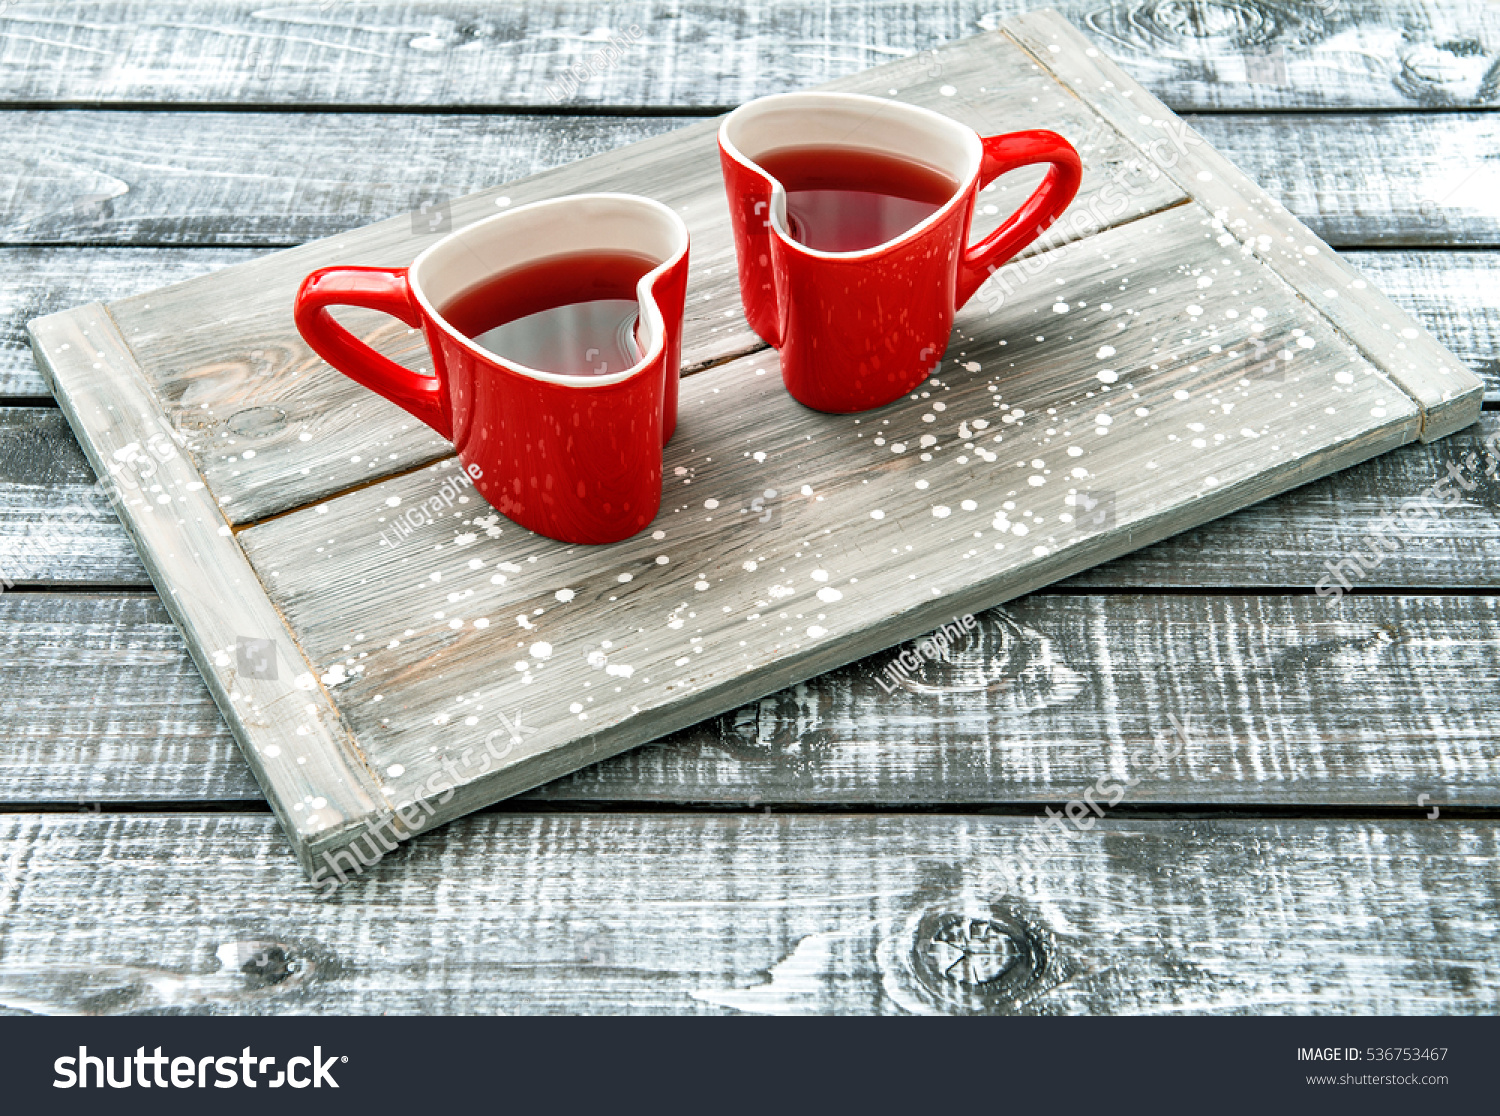 Heart shaped cups with red drink on rustic wooden background. Valentines day #536753467